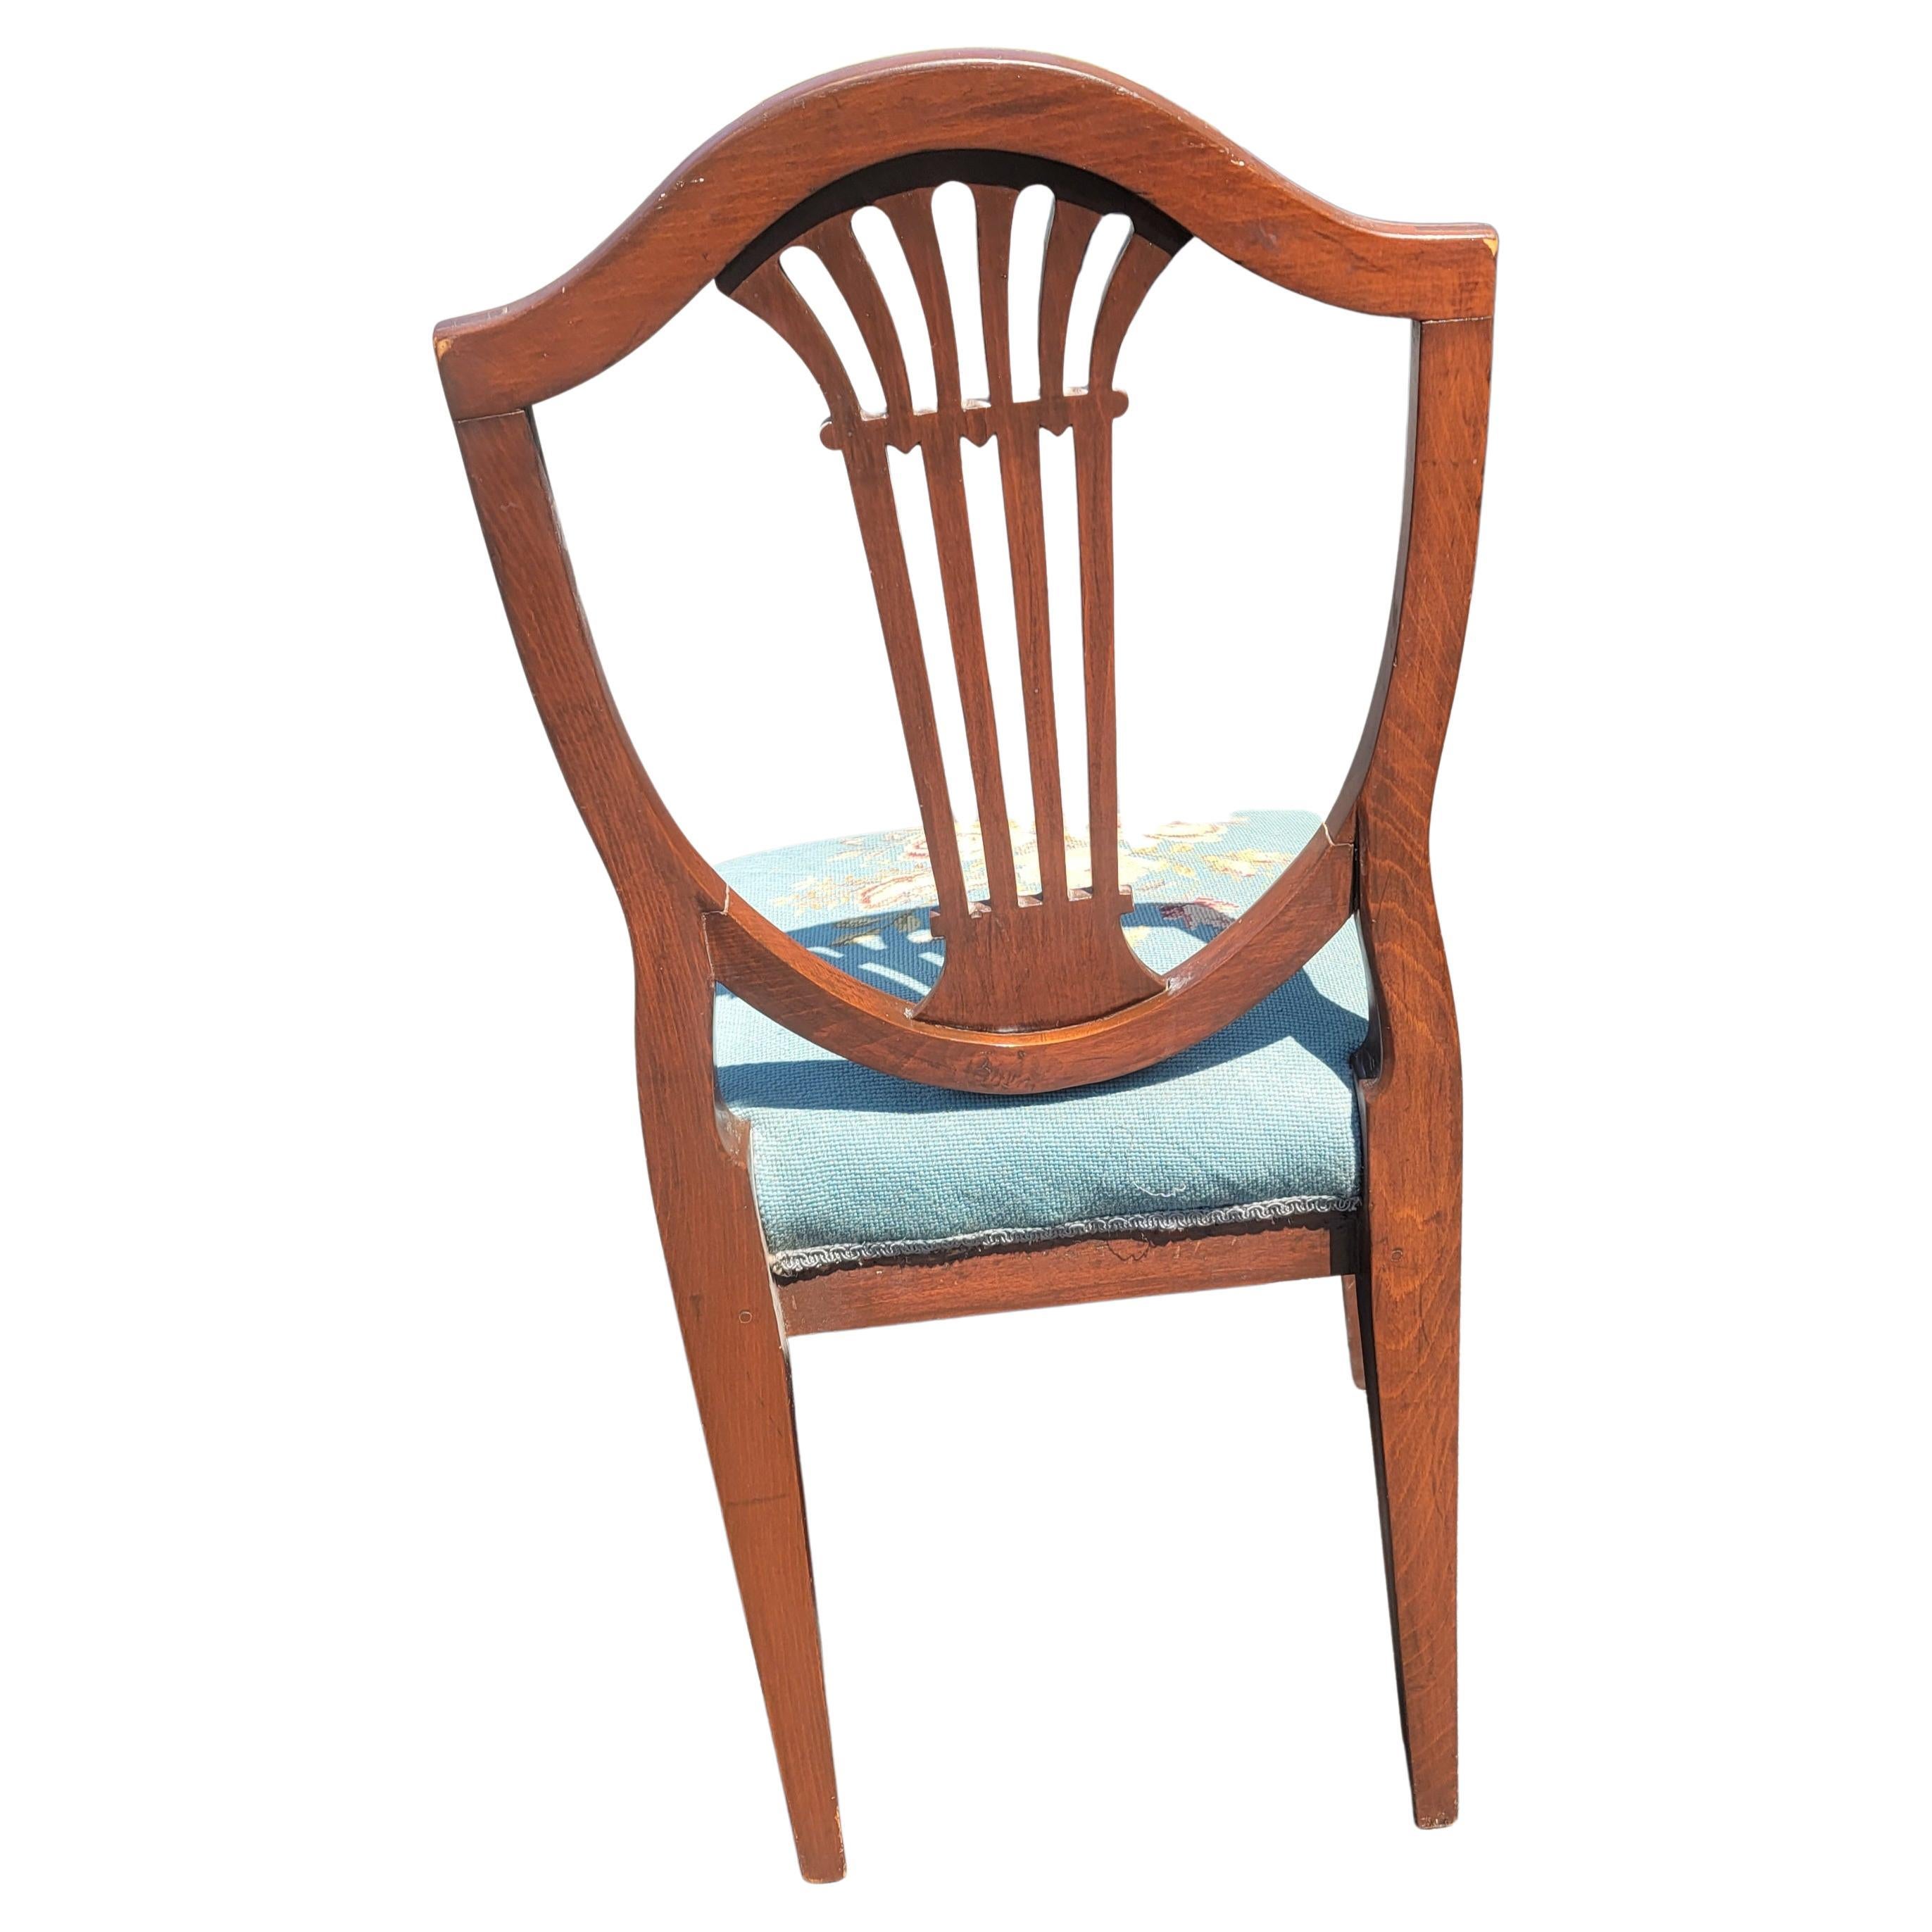 American 1940s Vintage Mahogany Shield Back Upholstered Needle Point Chairs, a Pair For Sale